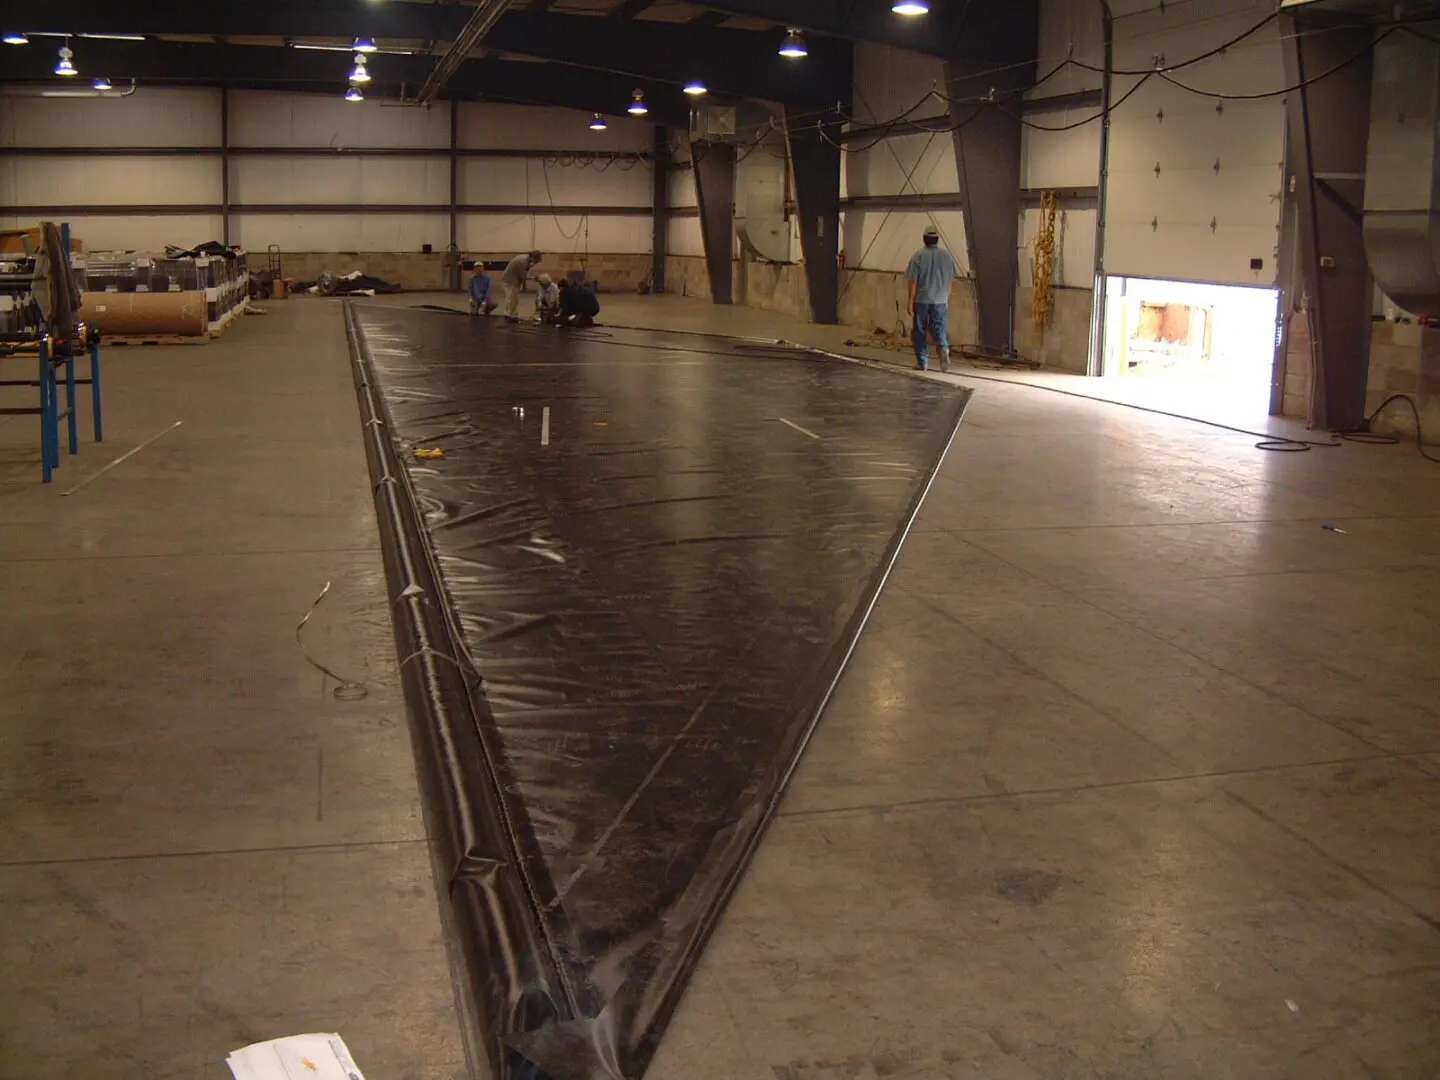 A large metal ramp in an industrial building.